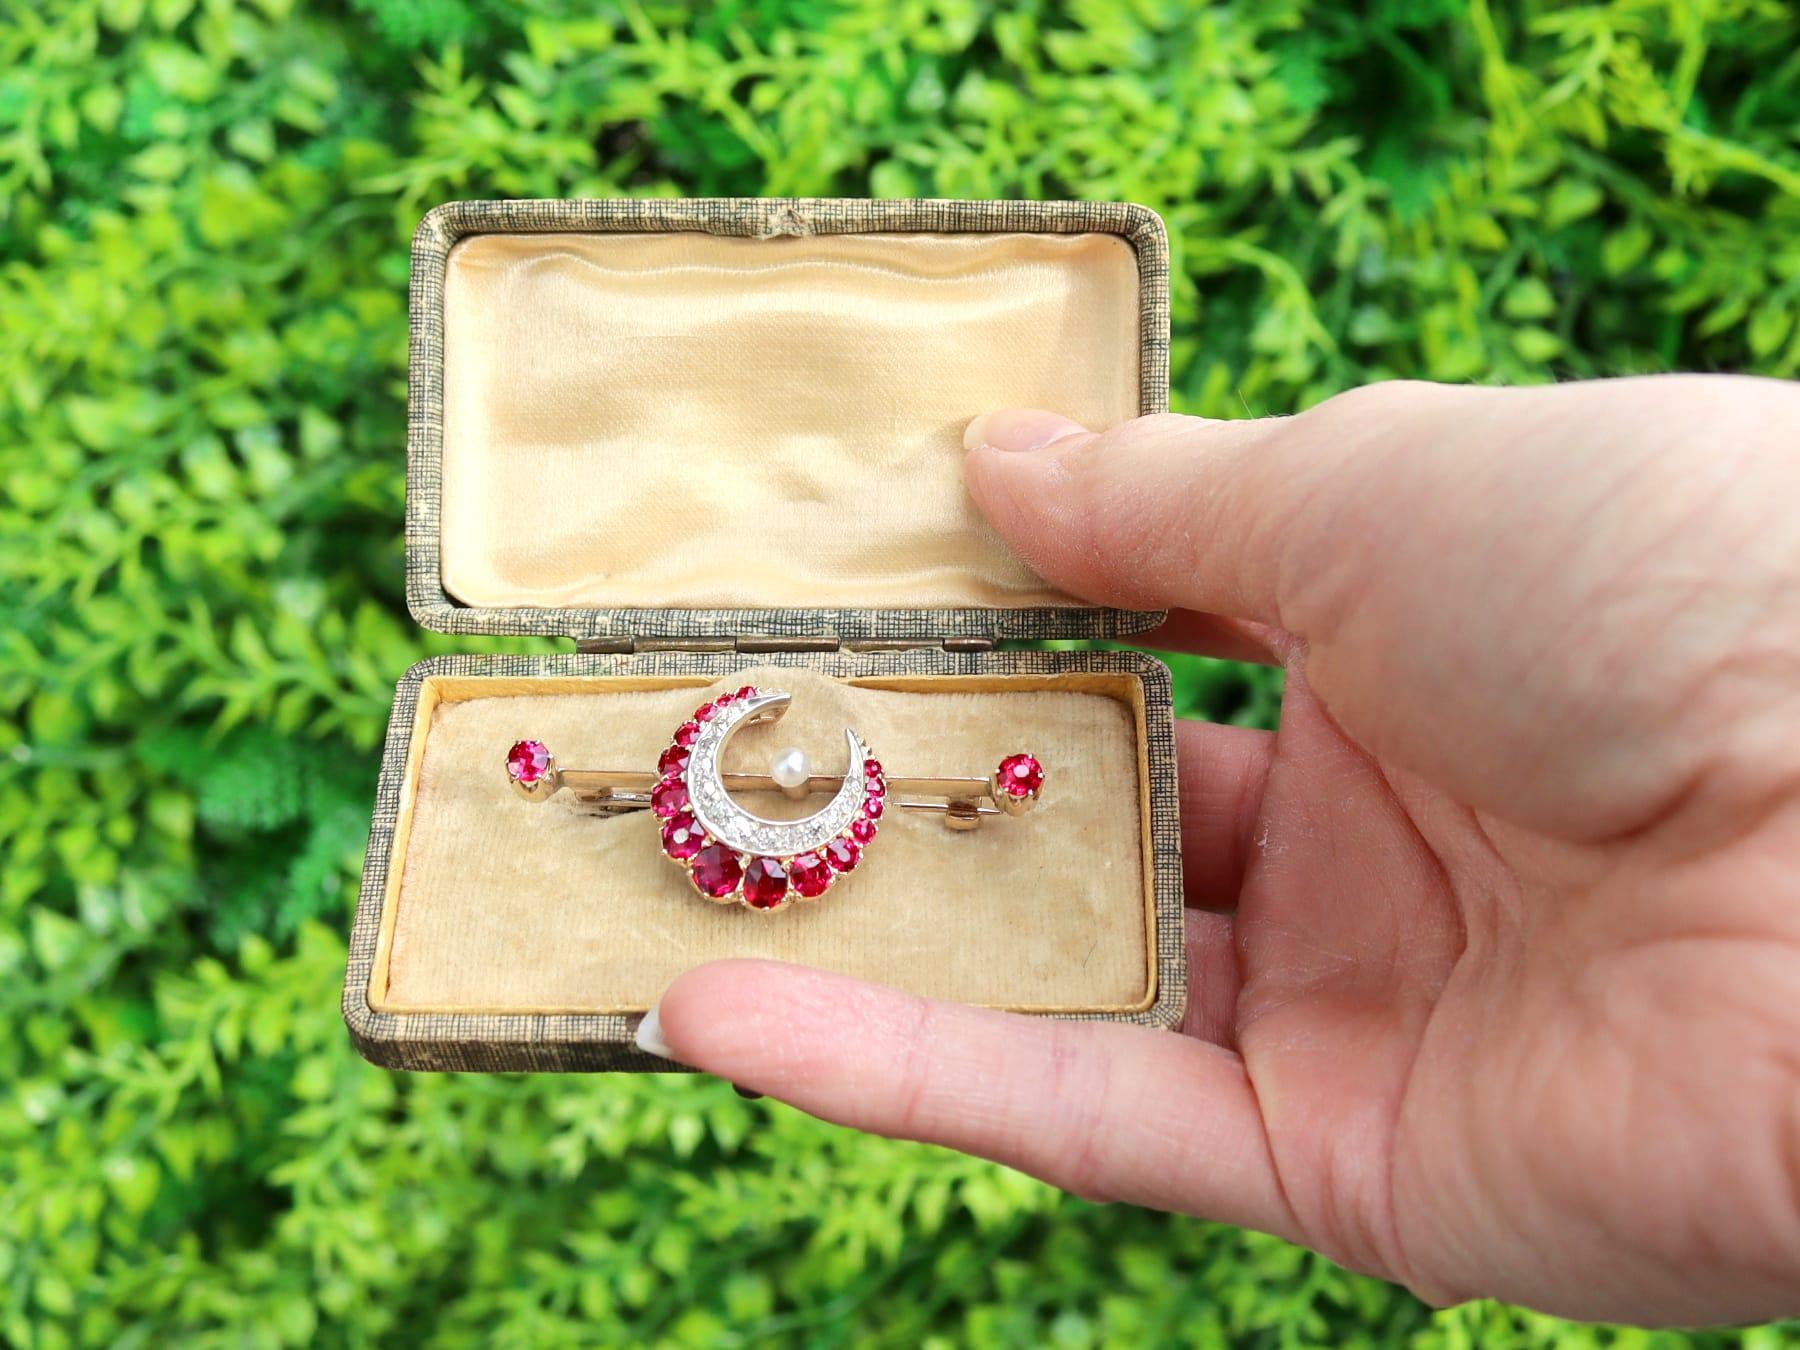 A stunning 2.38 carat ruby and 0.30 carat diamond, pearl and 14 karat yellow gold, 14k white gold set 'Crescent' bar brooch; part of our diverse antique jewelry collections.

This stunning, fine and impressive antique crescent moon brooch has been